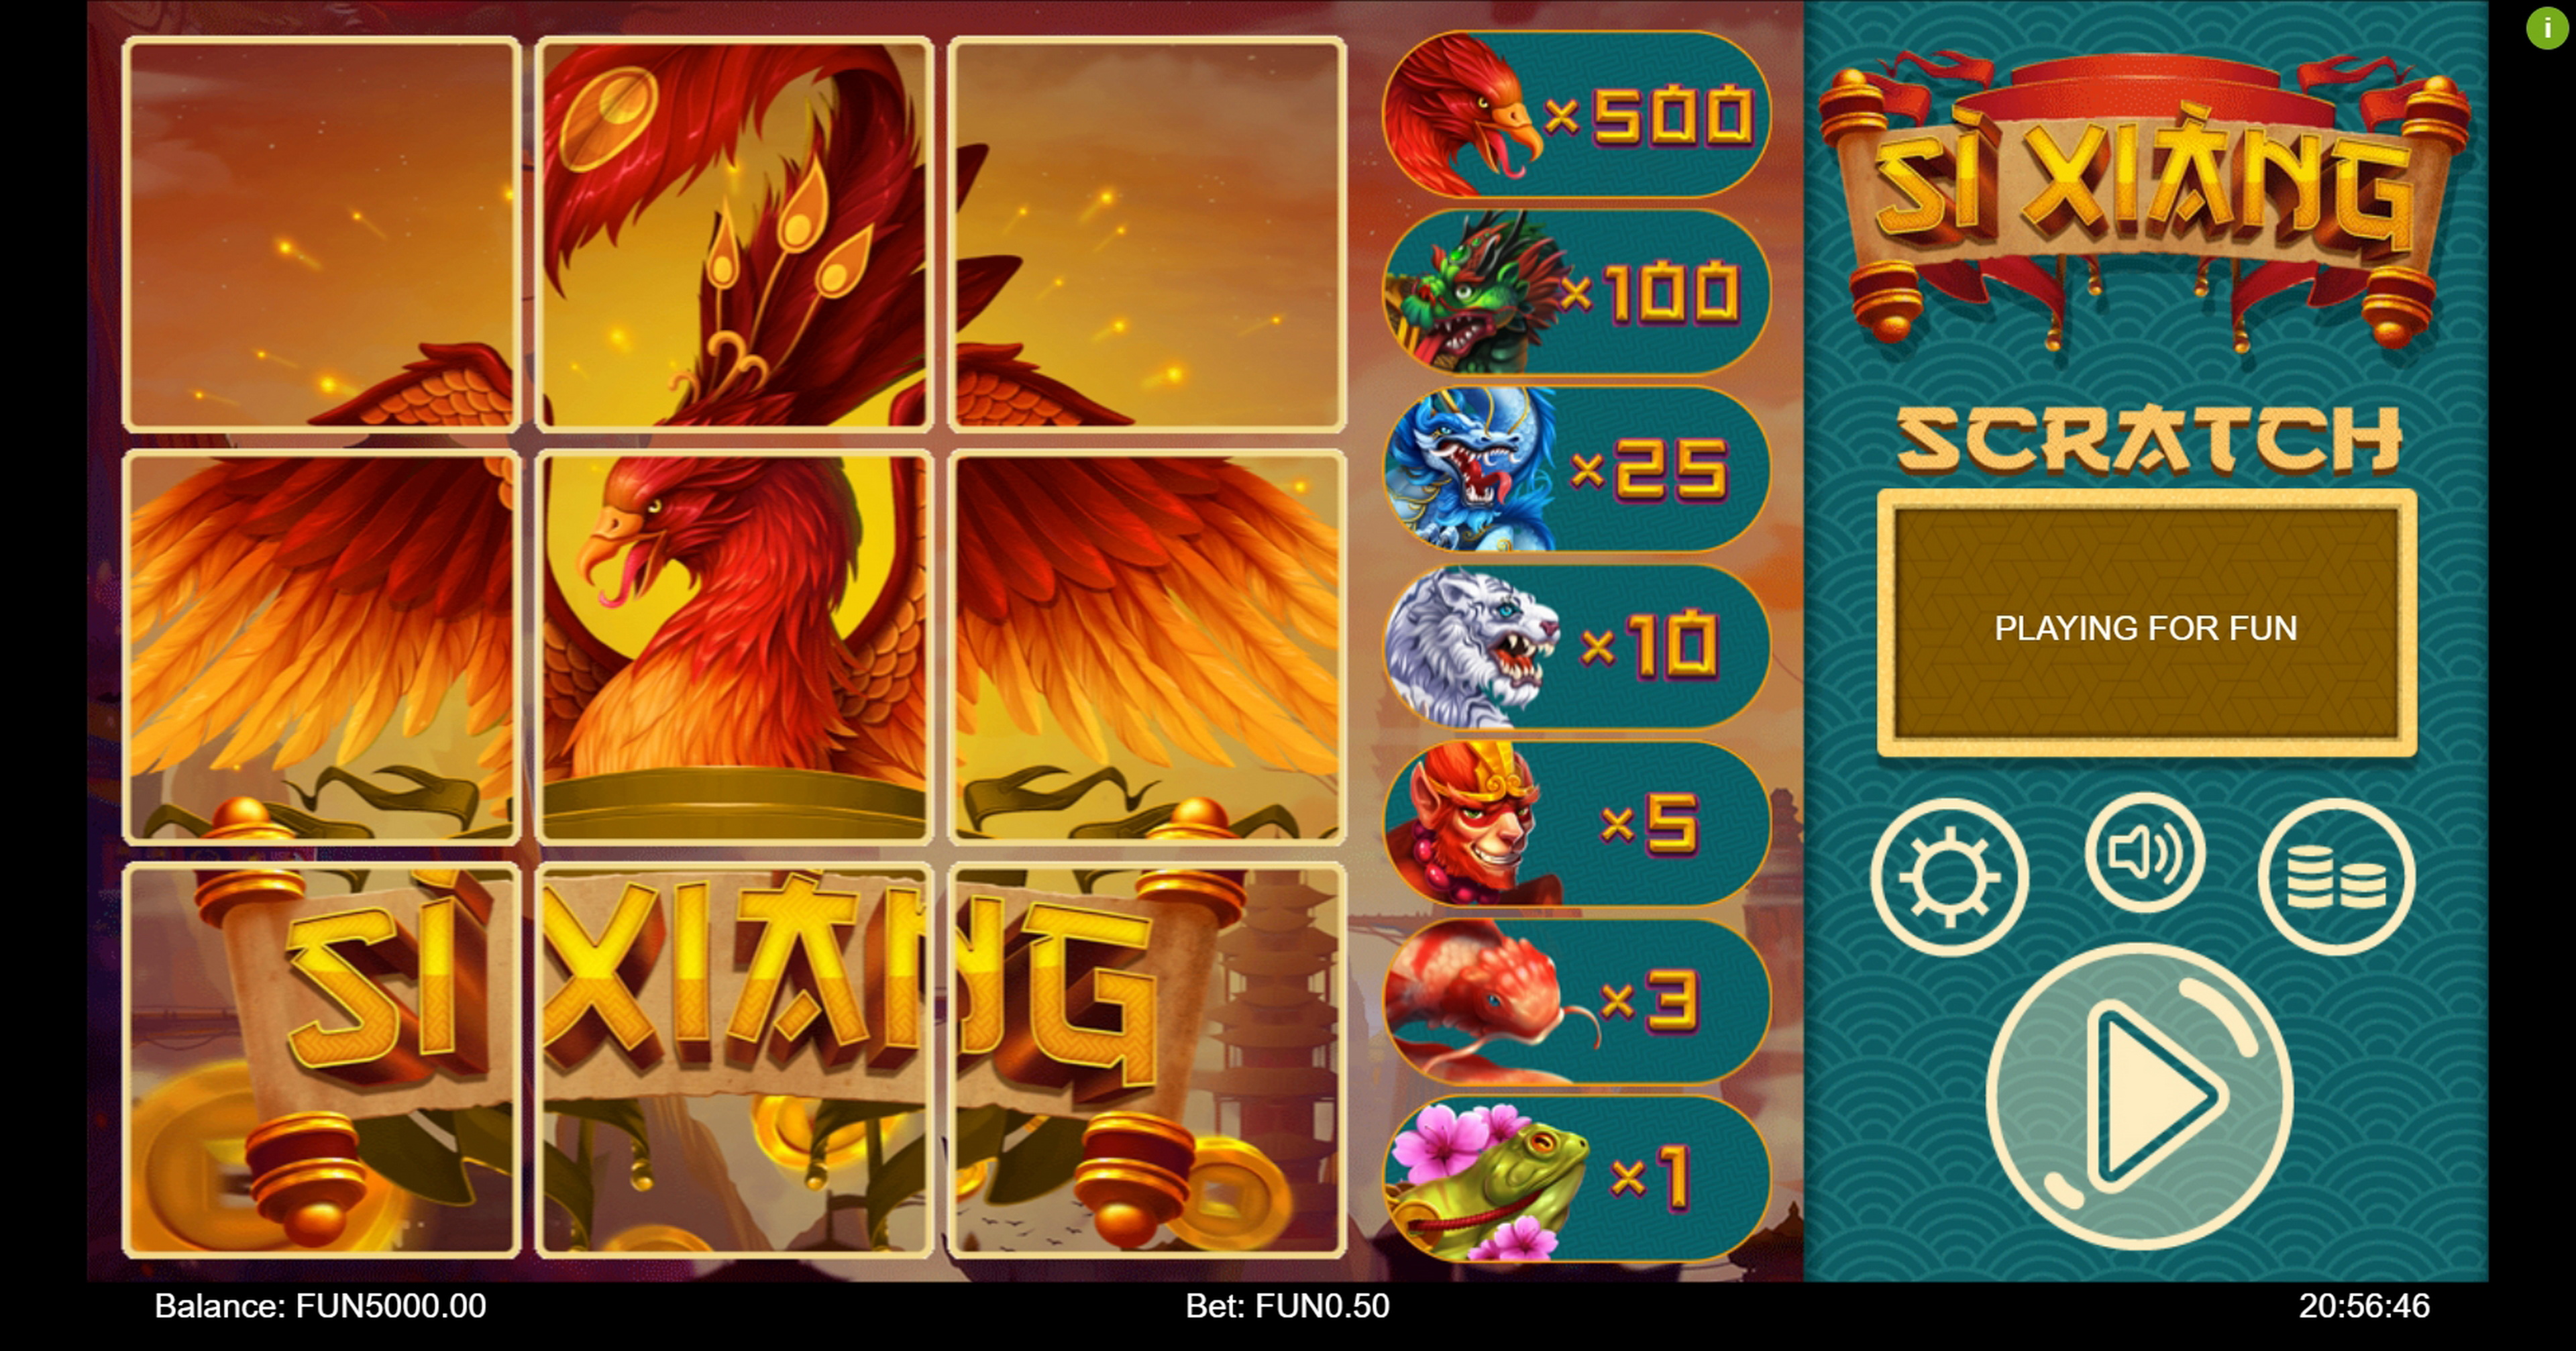 Reels in Si-Xiang Scratch Slot Game by Iron Dog Studios